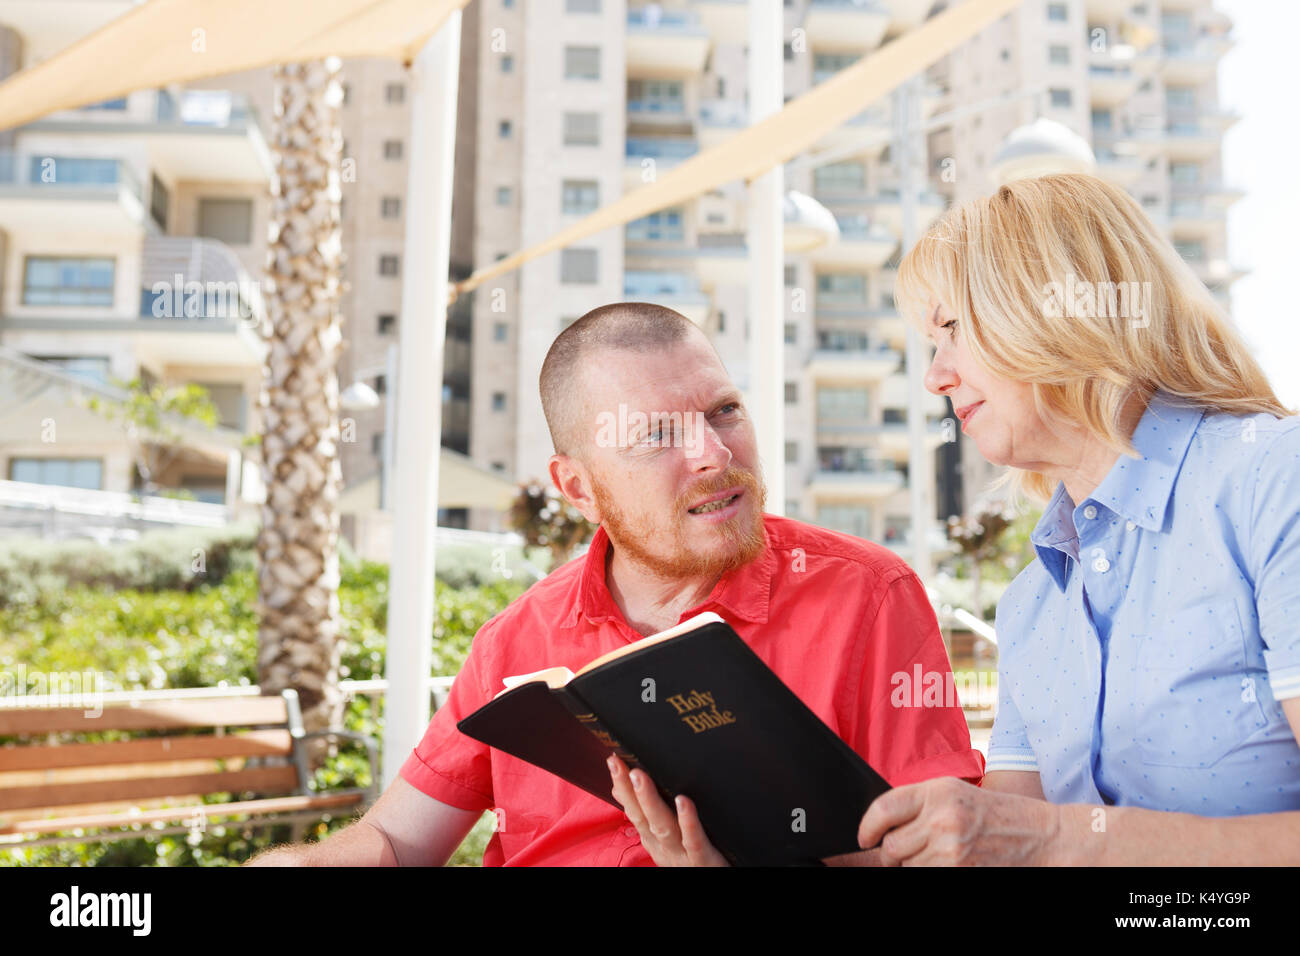 We studying Holy Bible together. Disabled man. Stock Photo